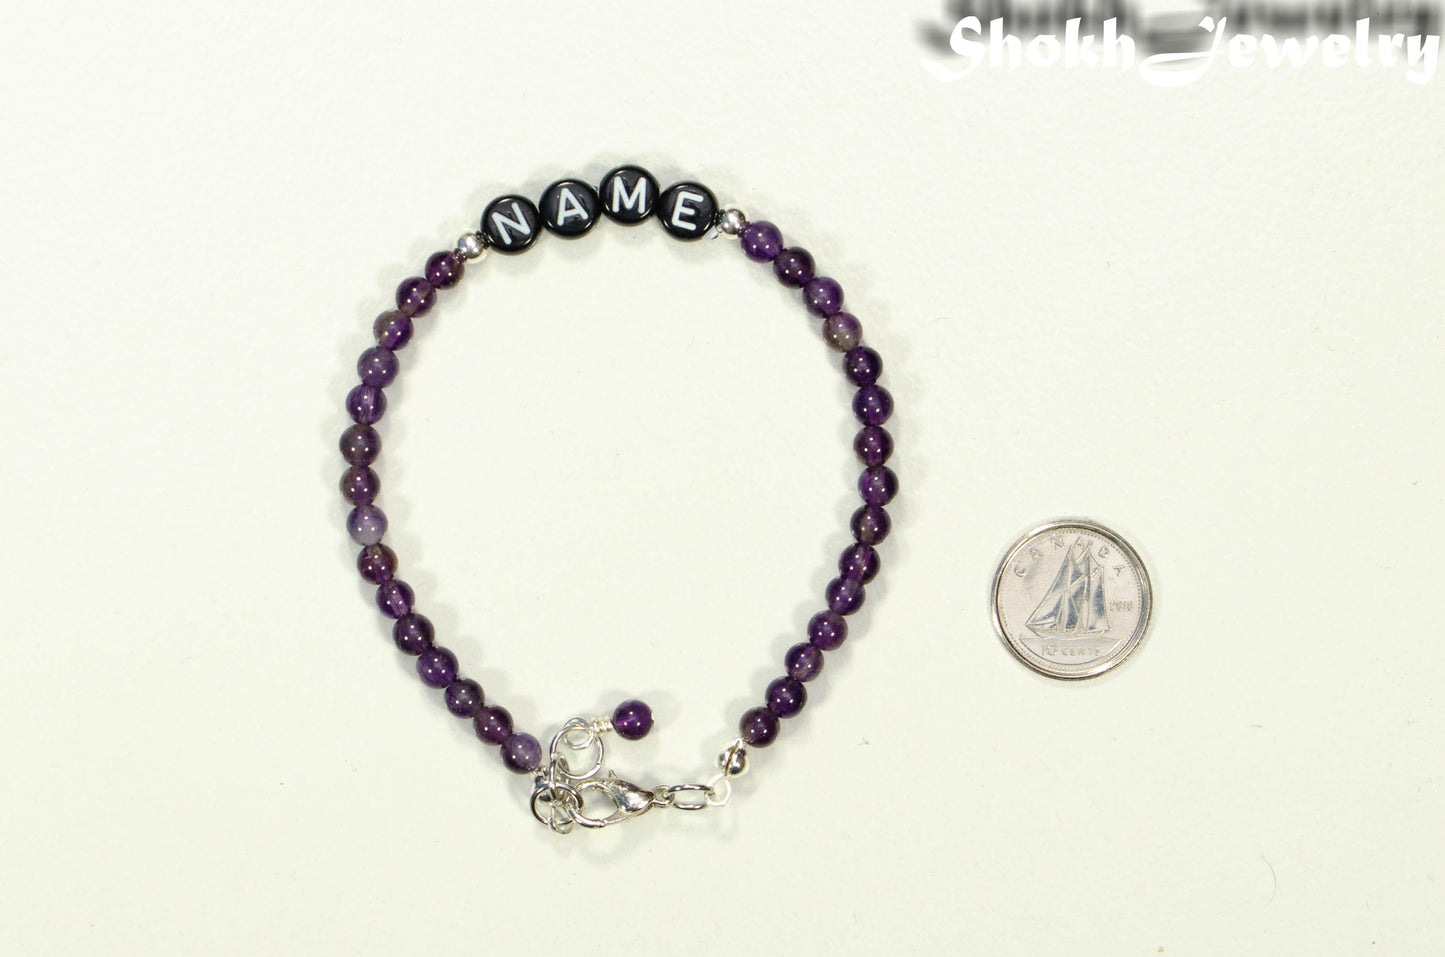 Personalized Amethyst Name Bracelet with Clasp beside a dime.